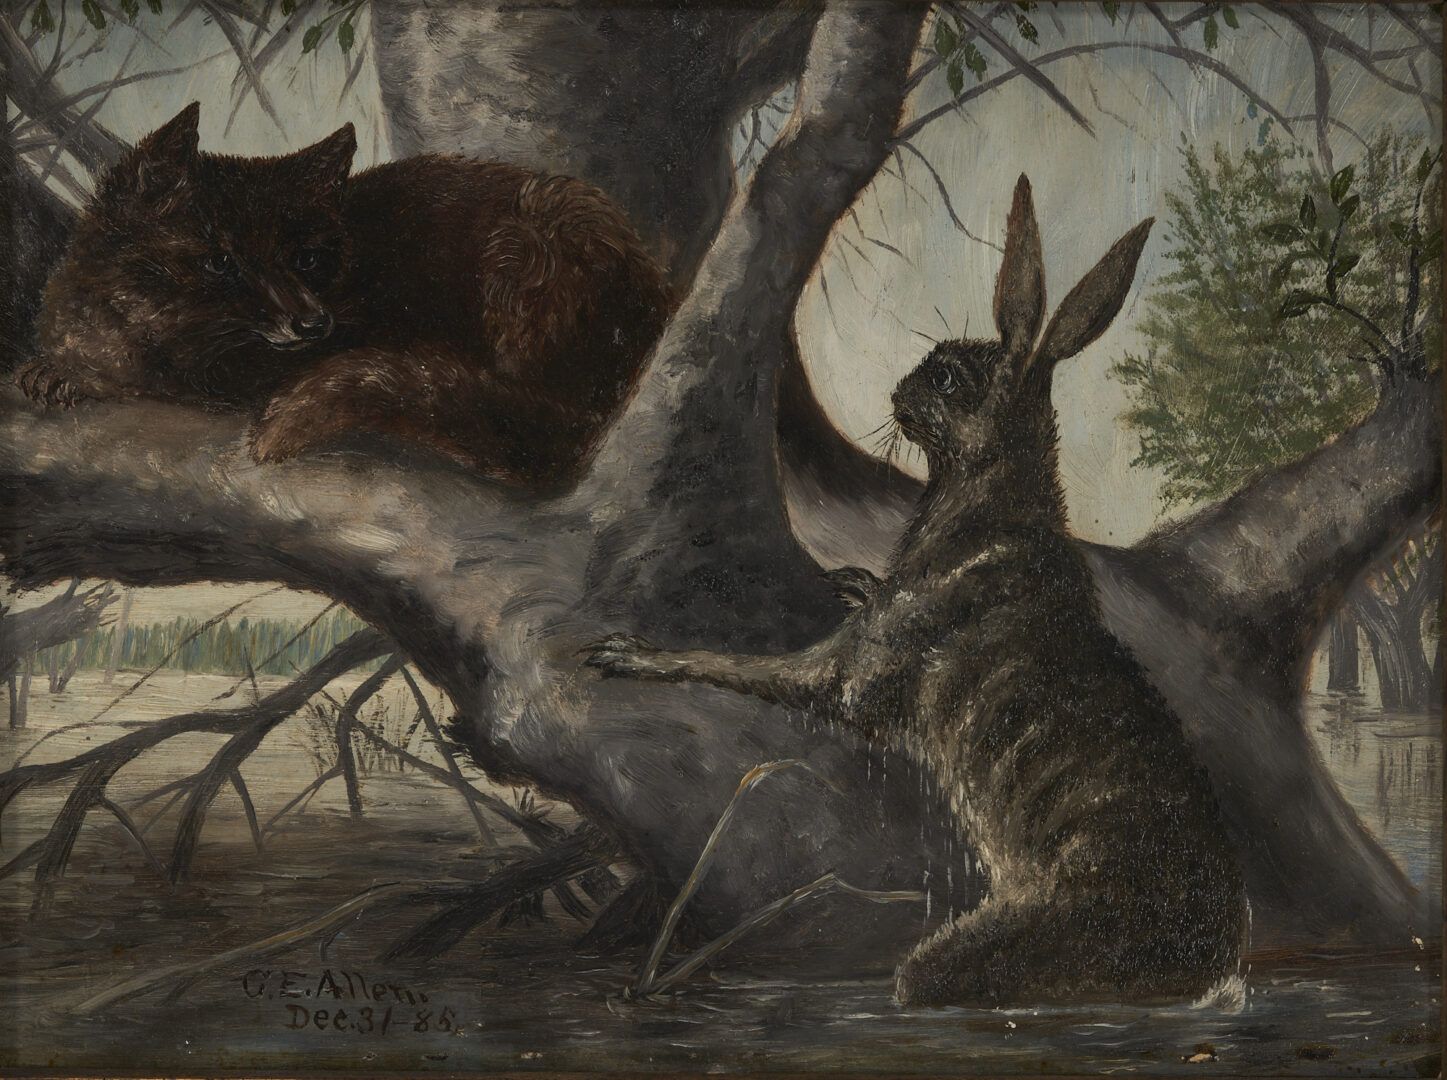 Lot 635: Rabbit and Fox During a Flood O/B Painting, after Ludwig Beckmann, 1885